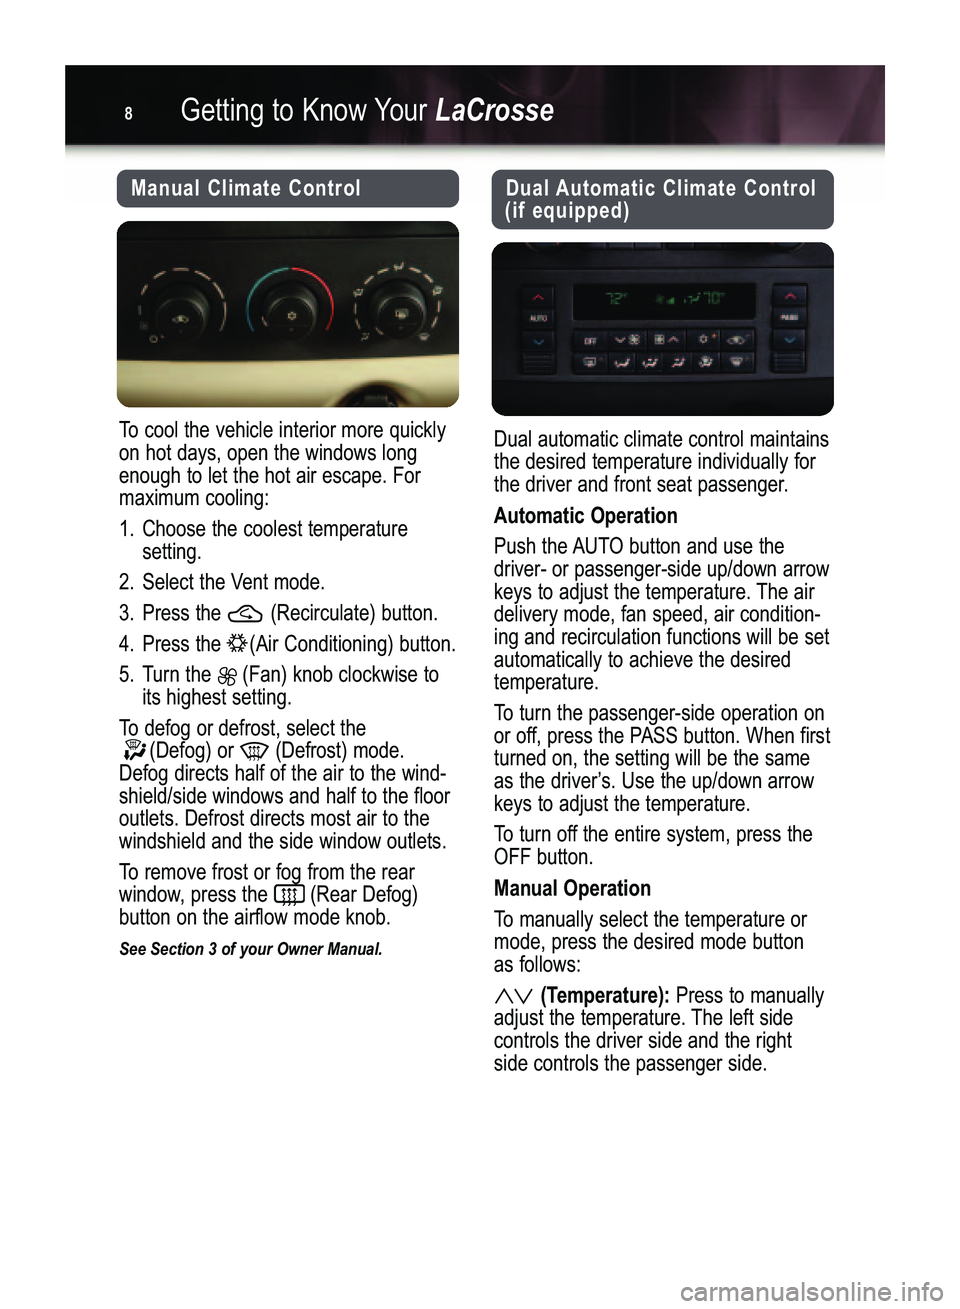 BUICK LACROSSE 2007  Get To Know Guide Getting to Know YourLaCrosse8
Dual Automatic Climate Control
(if equipped)
Dual automatic climate control maintains
the desired temperature individually for
the driver and front seat passenger. 
Autom